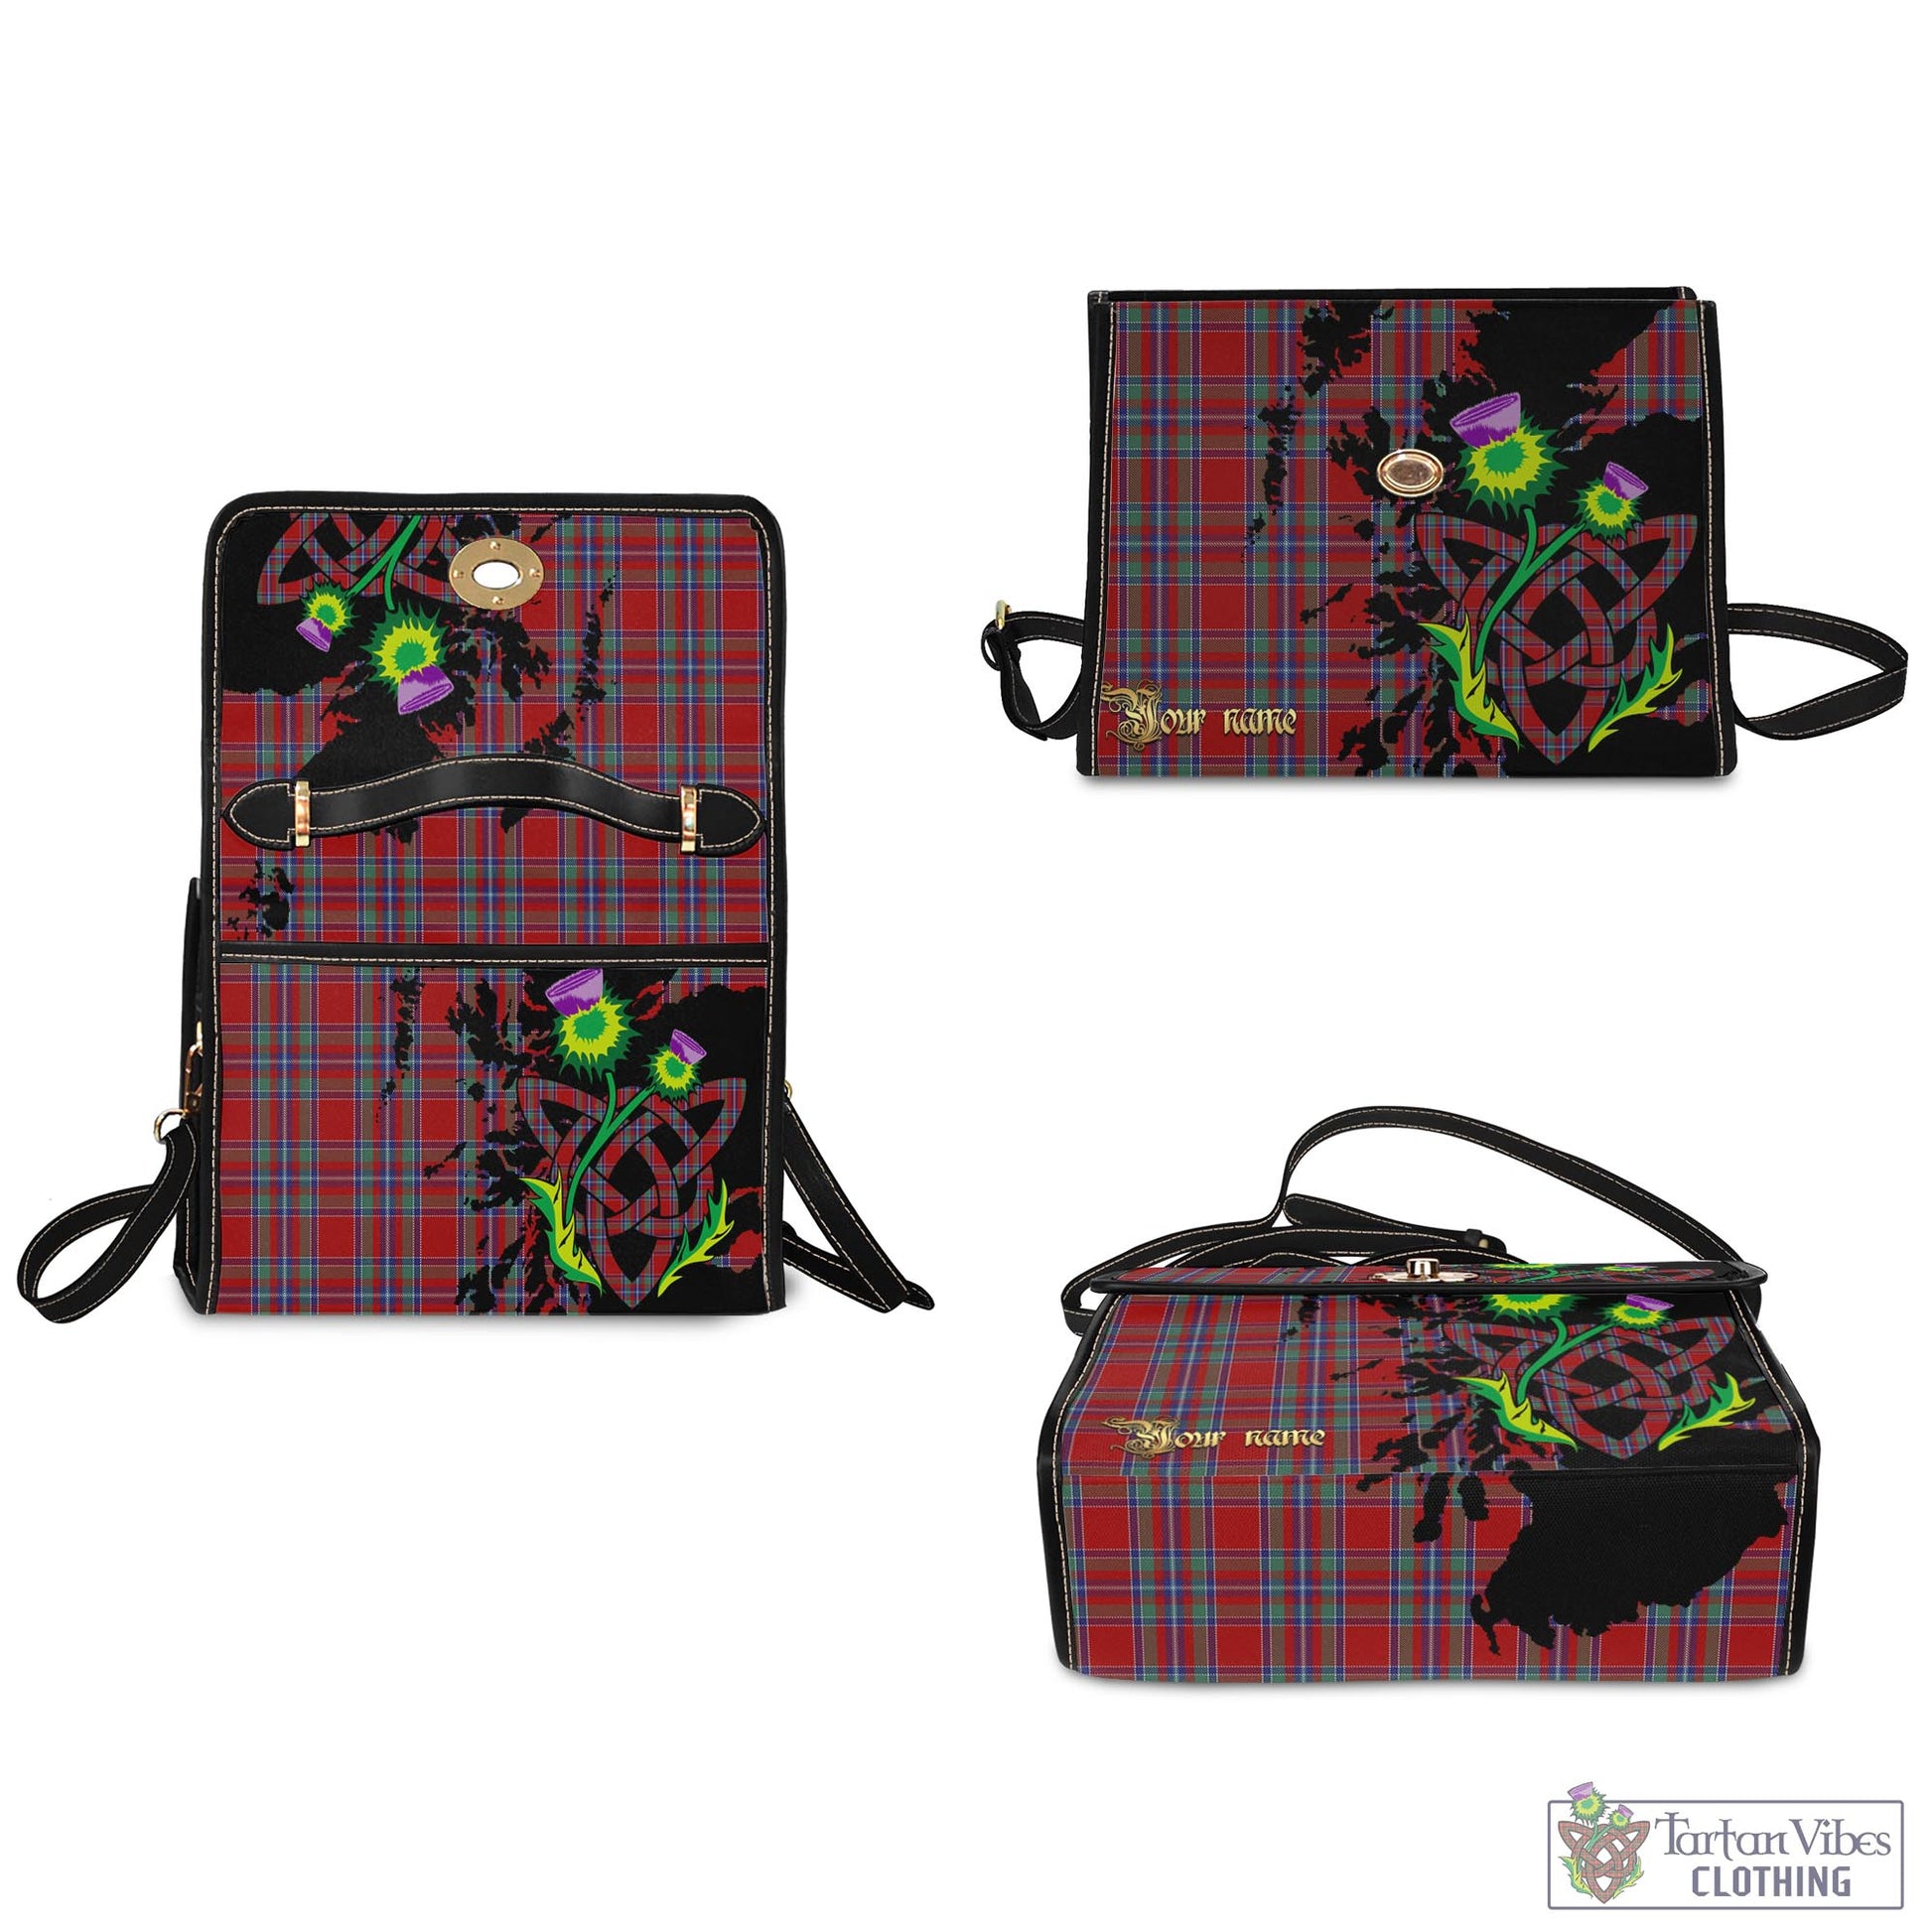 Tartan Vibes Clothing Spens Tartan Waterproof Canvas Bag with Scotland Map and Thistle Celtic Accents